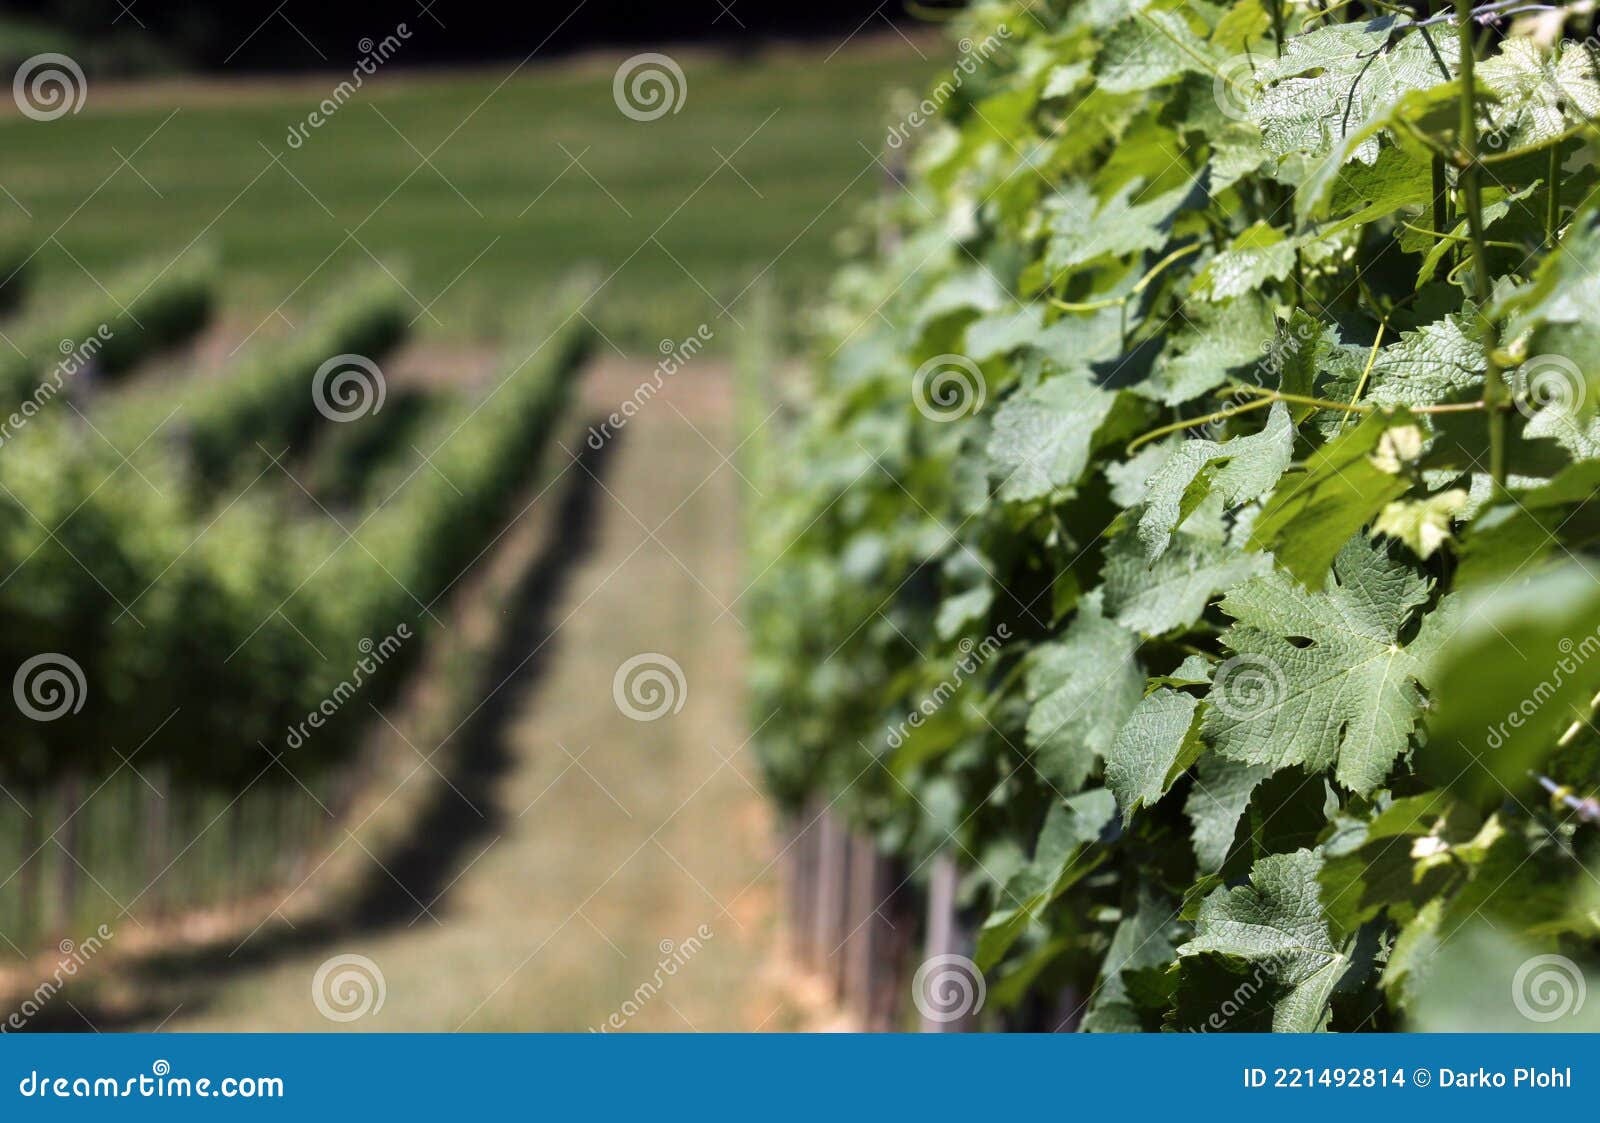 vineyard in summer when the vines are in bloom